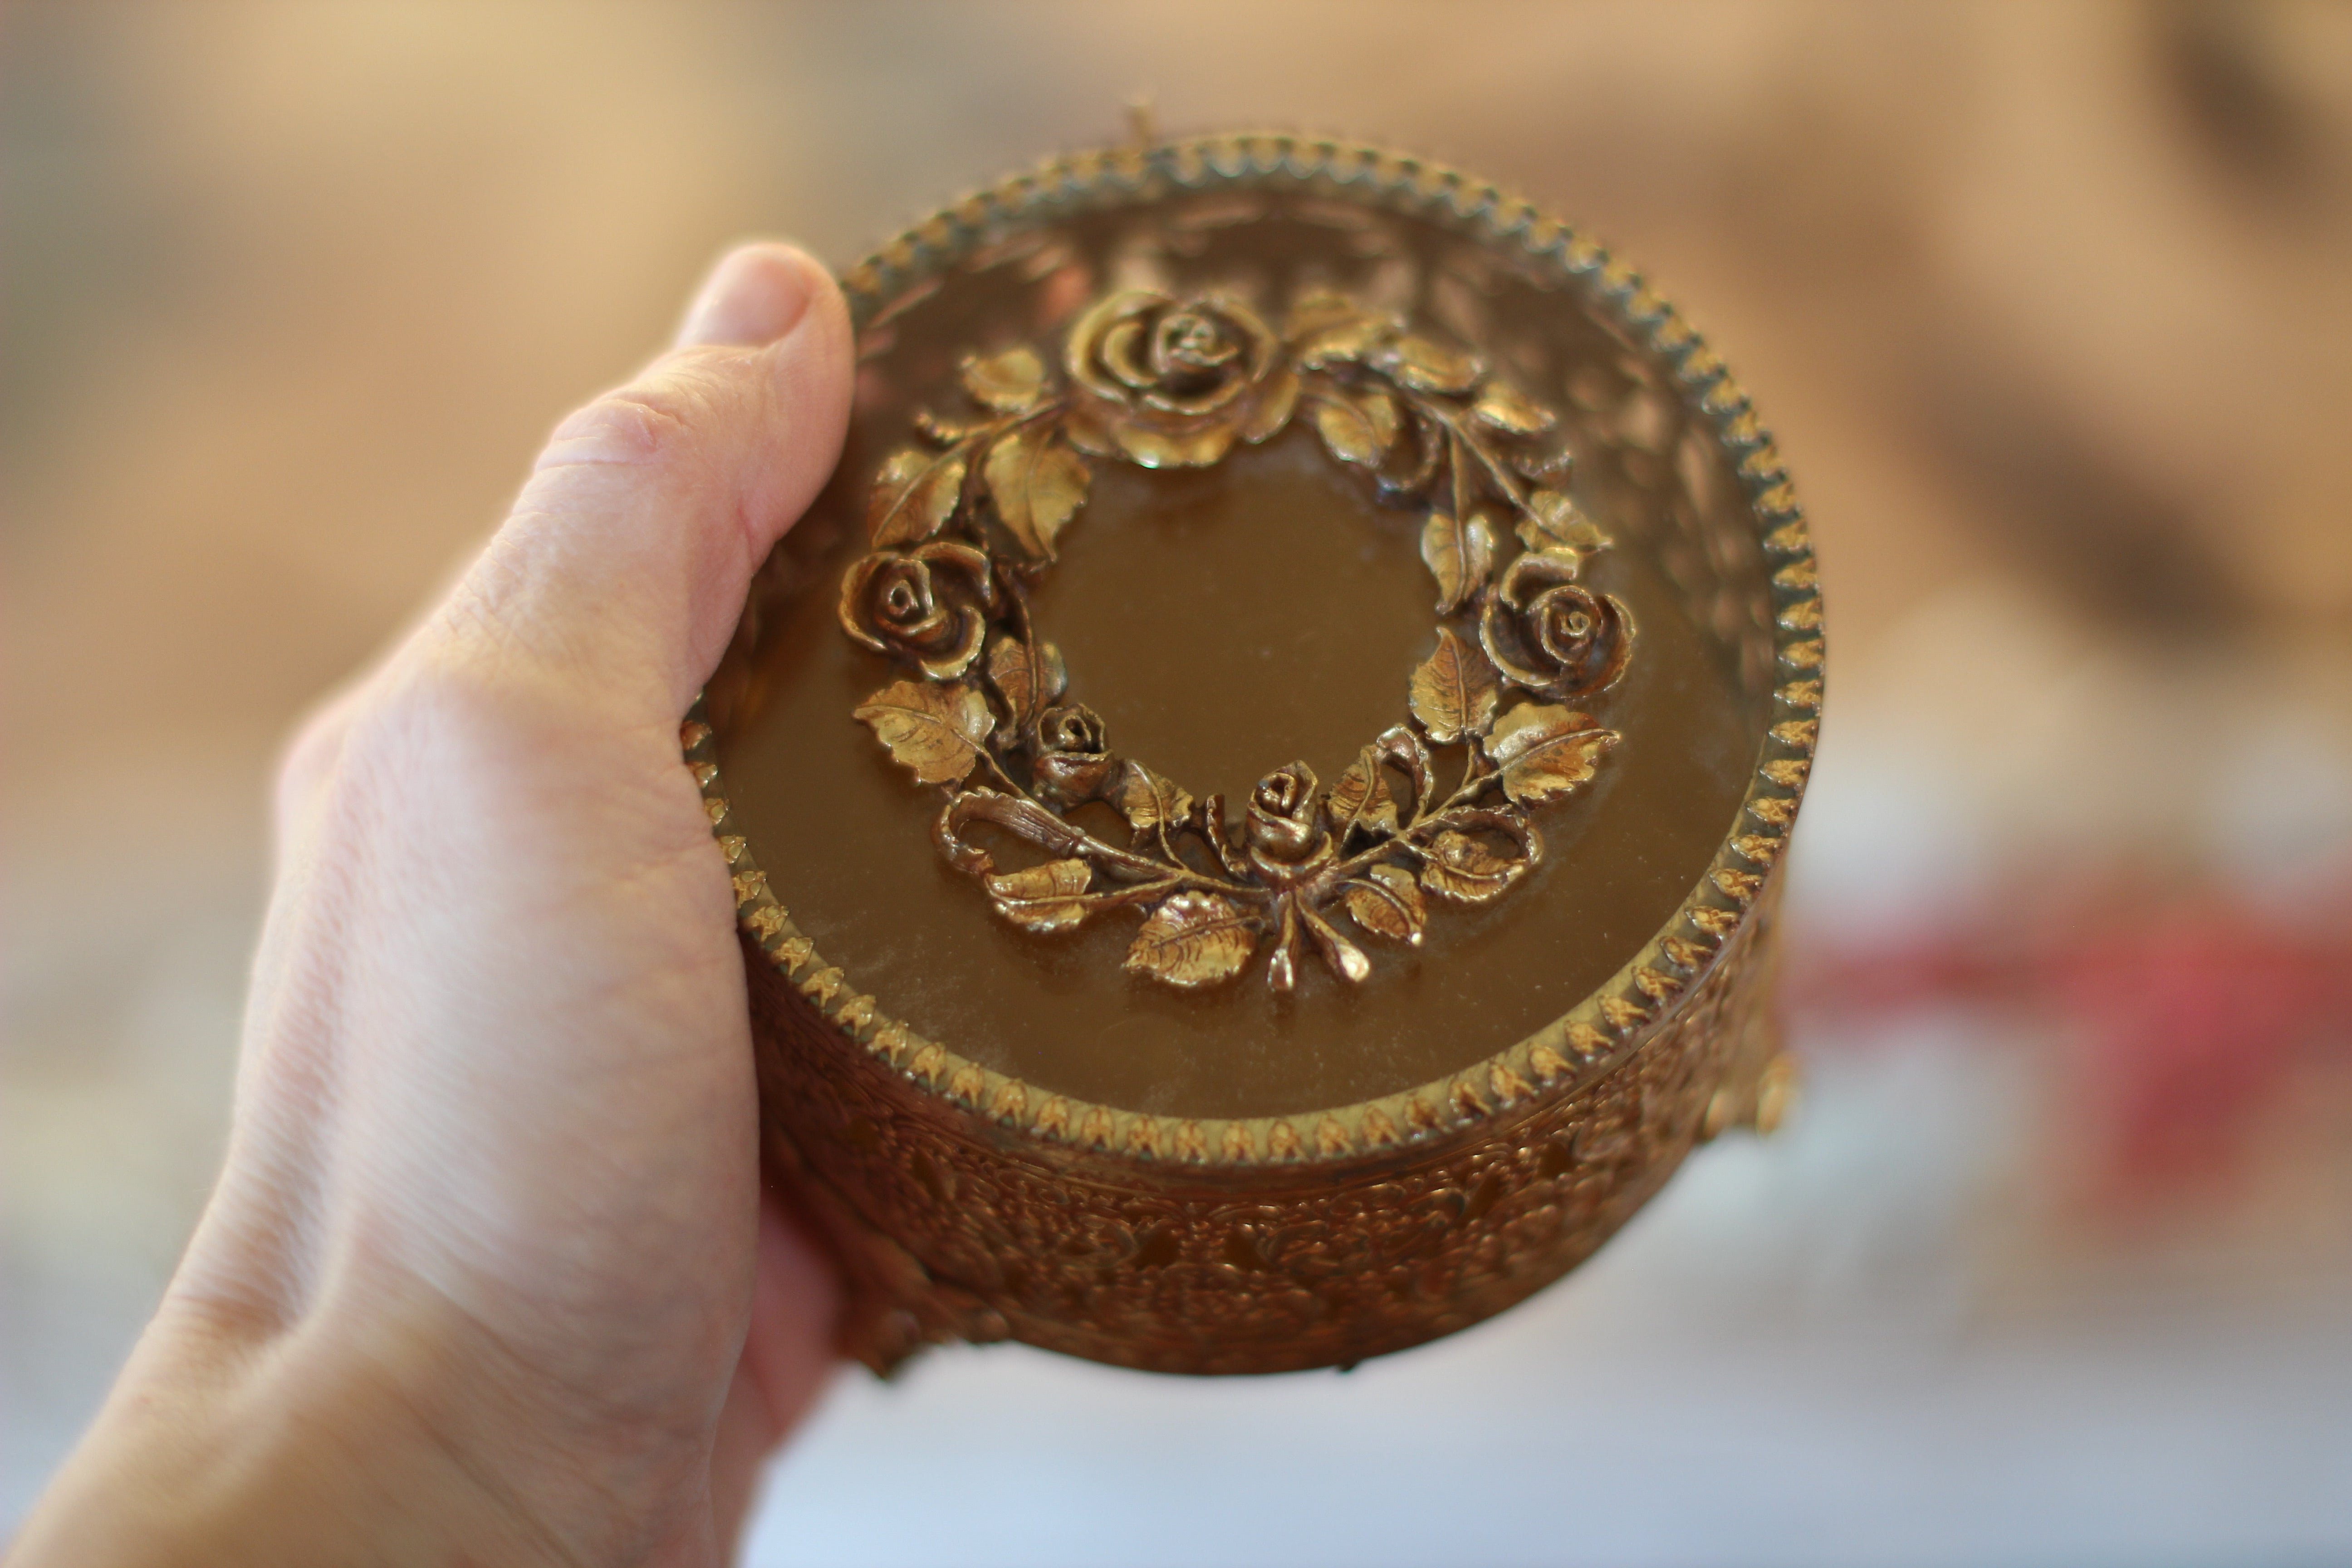 Antique Rounded Floral Wreath Jewelry Box